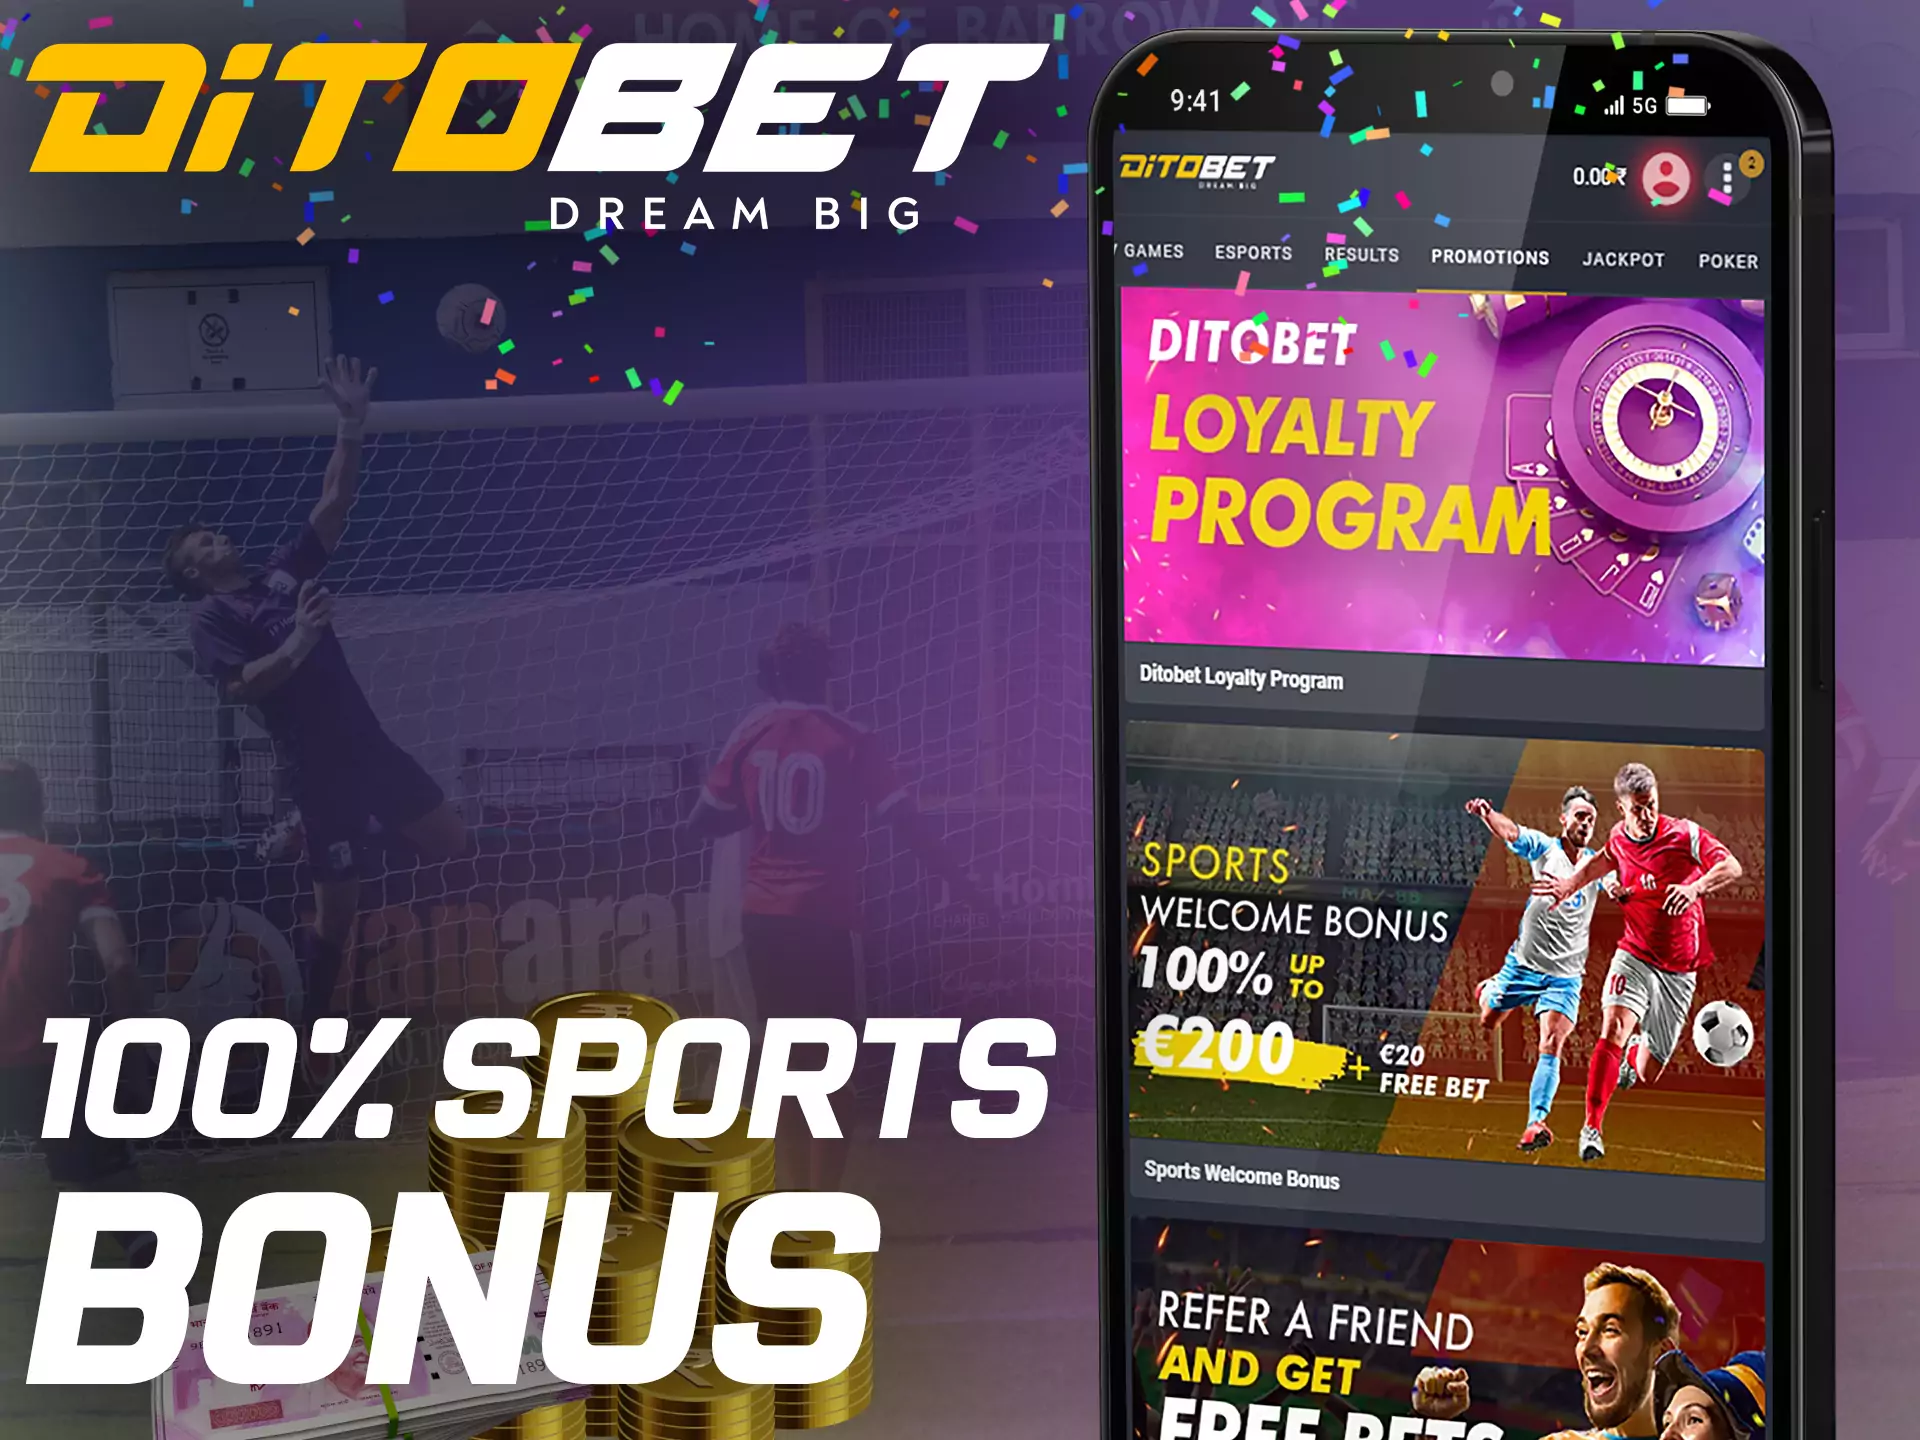 Ditobet offers a special bonus for sports betting.